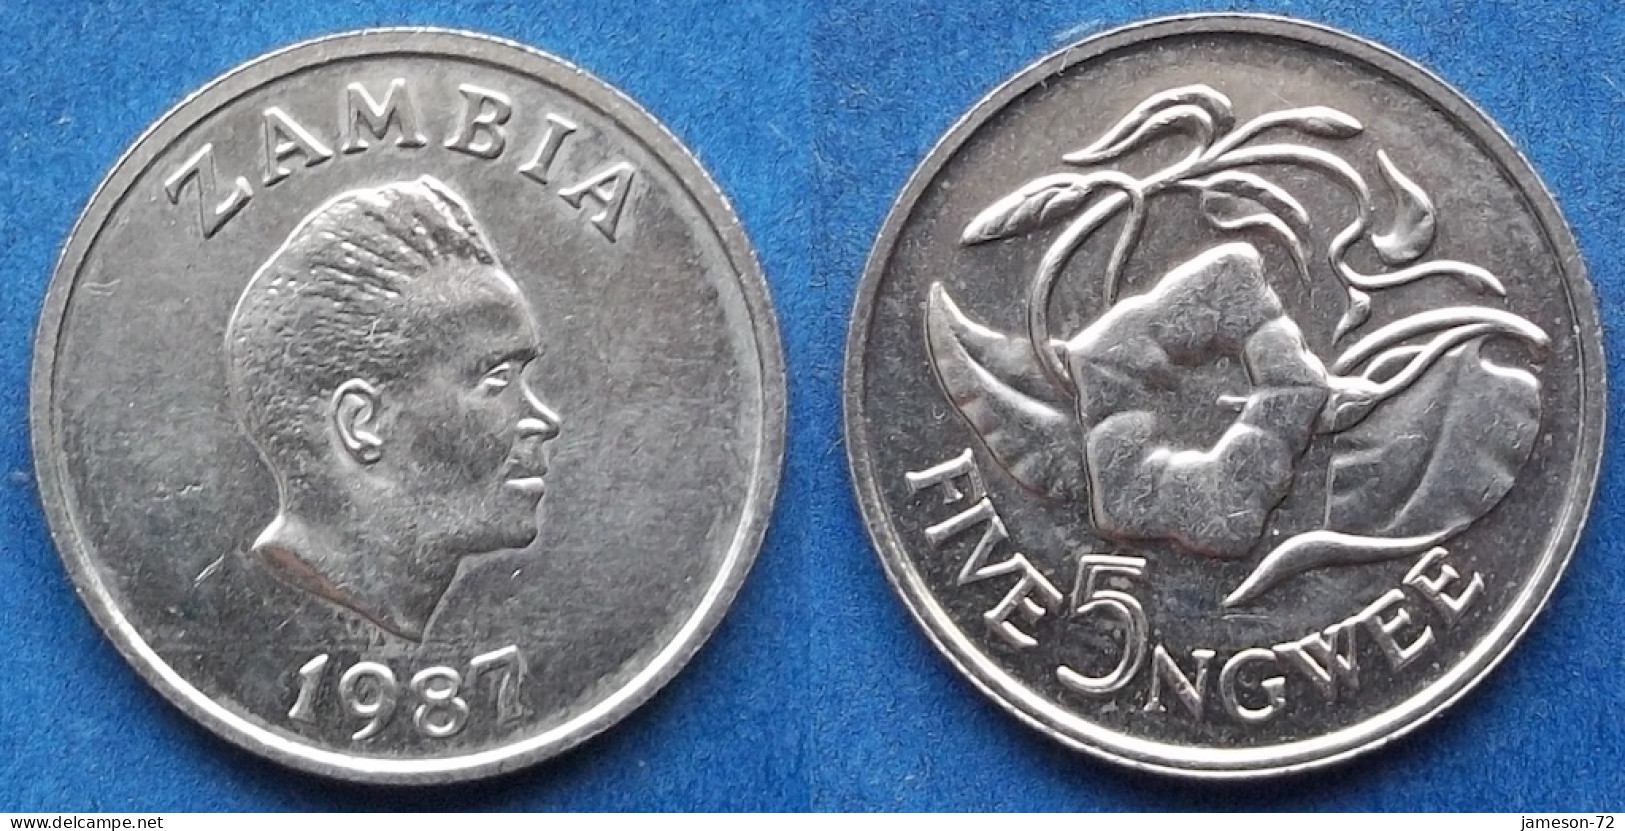 ZAMBIA - 5 Ngwee 1987 "Morning Glory" KM# 11 Decimal Coinage (1968-2013) - Edelweiss Coins - Zambia